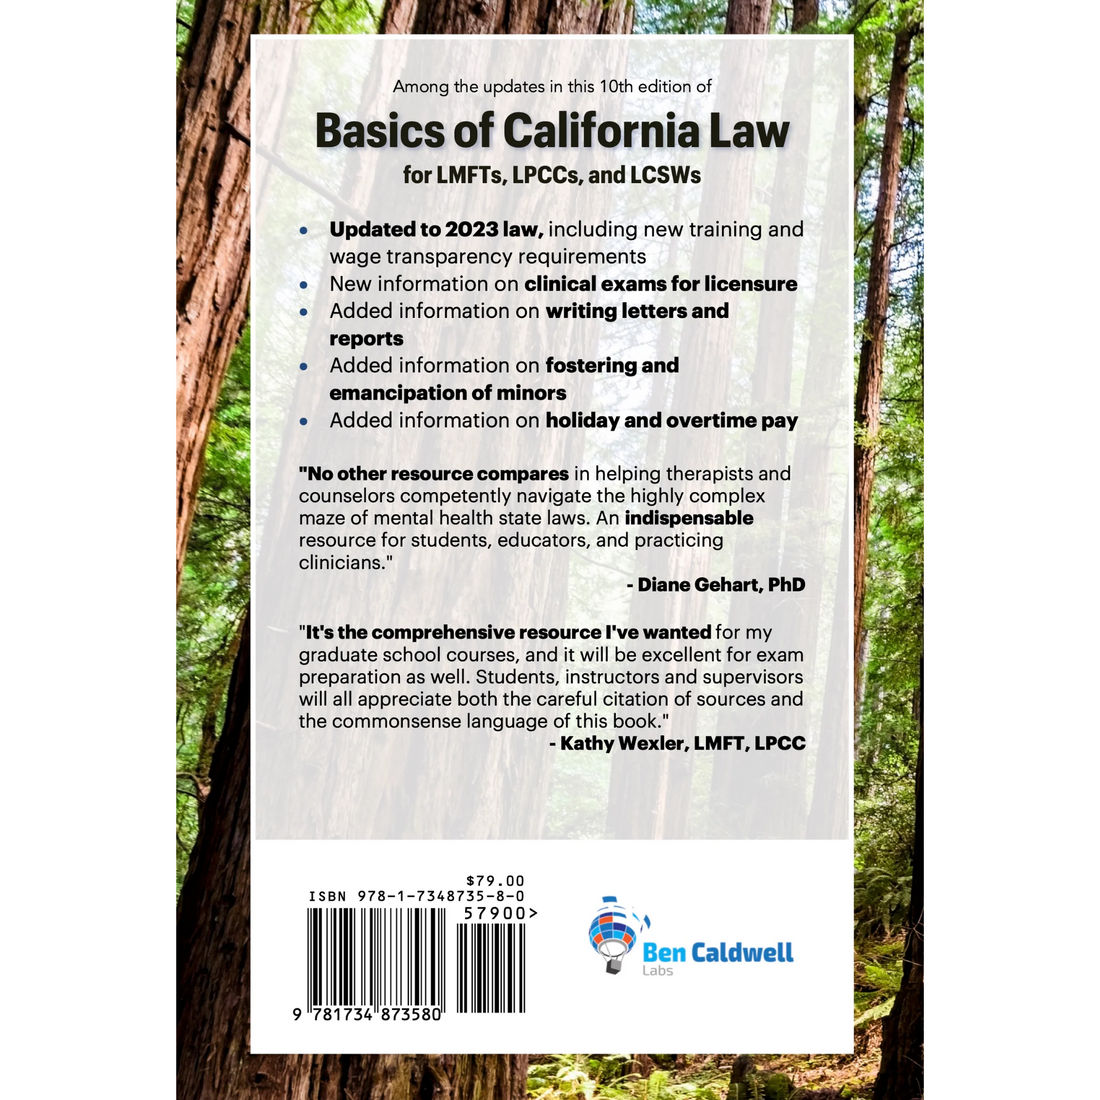 120-day rental - Basics of California Law for LMFTs, LPCCs, and LCSWs, 10th ed digital